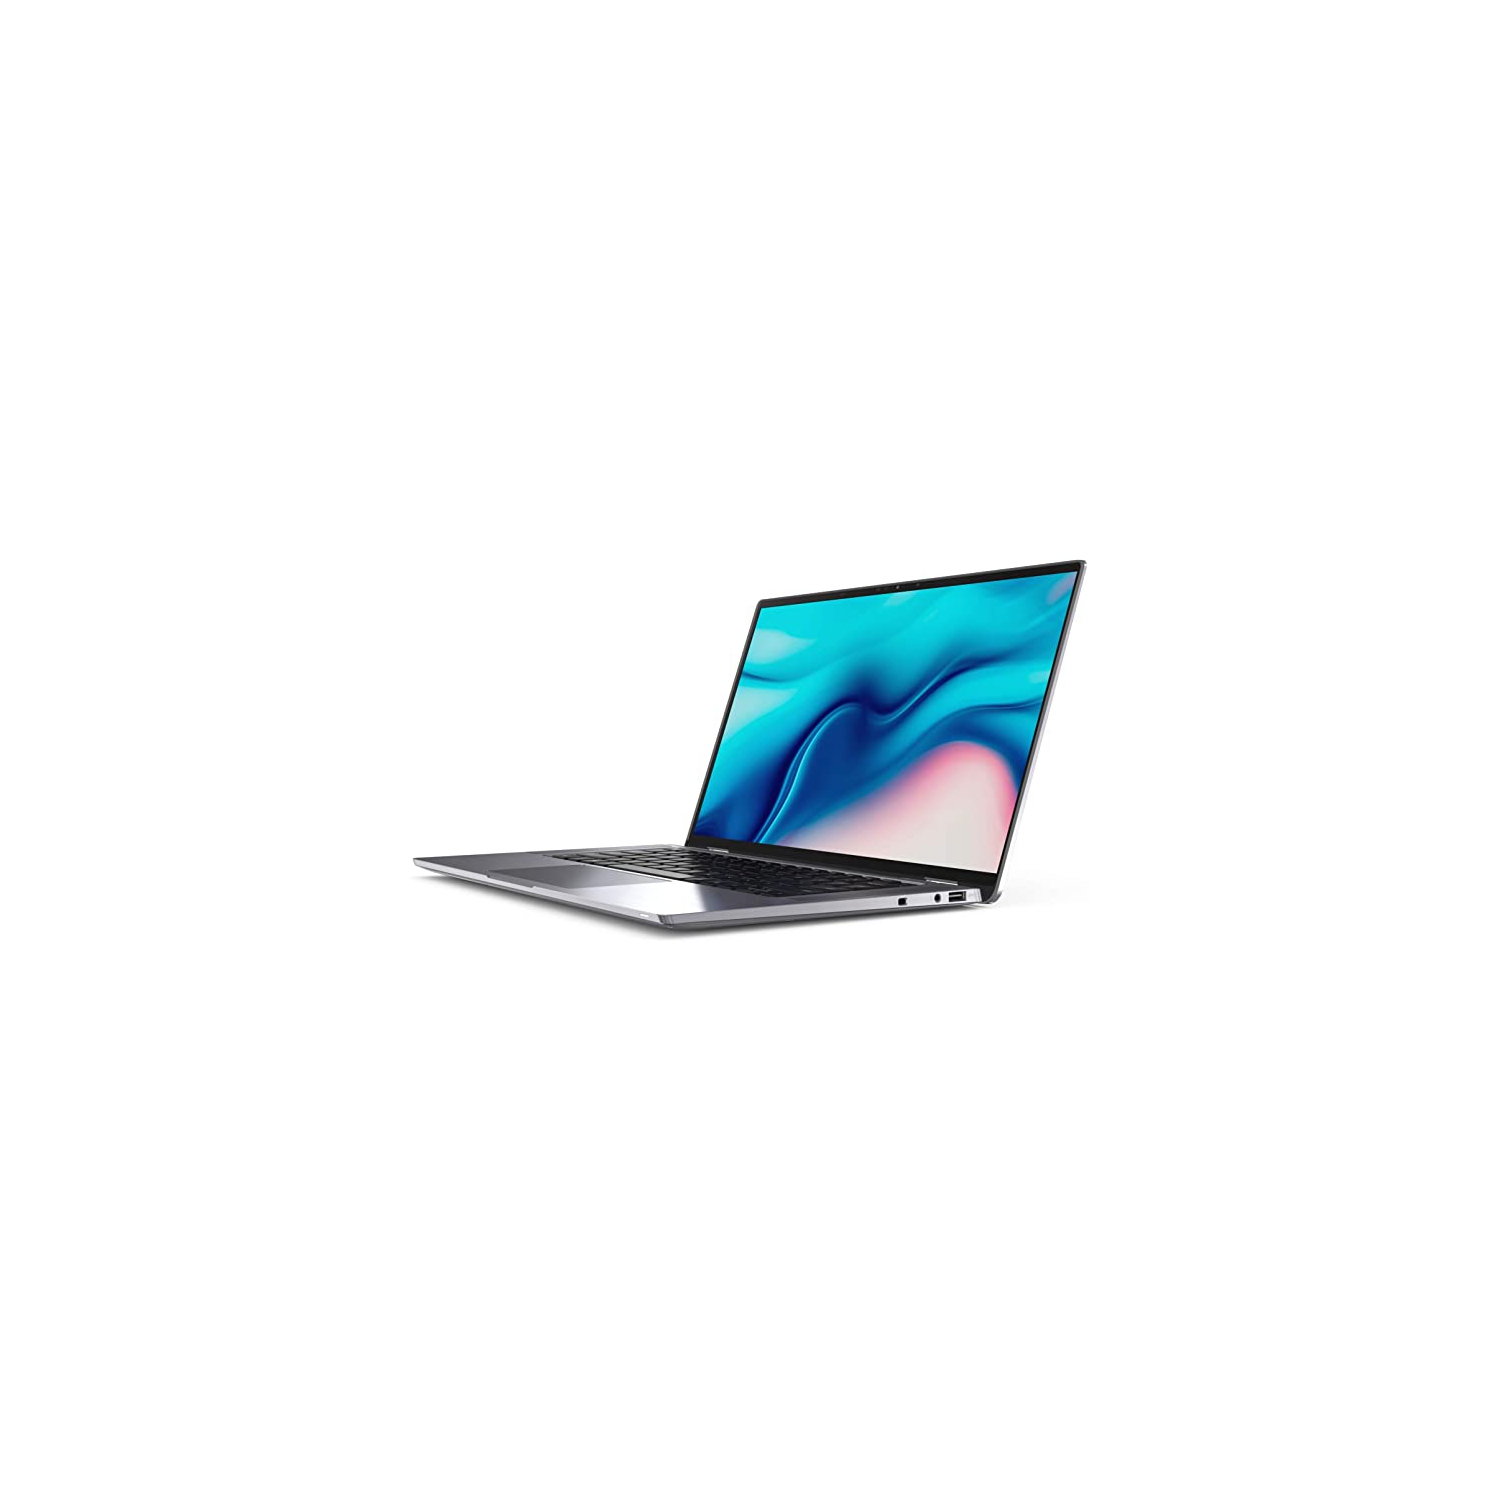 Refurbished (Excellent) - Dell Latitude 9000 9510 Laptop (2020) | 15.6" FHD | Core i5 - 256GB SSD - 8GB RAM | 4 Cores @ 4.2 GHz - 10th Gen CPU Certified Refurbished